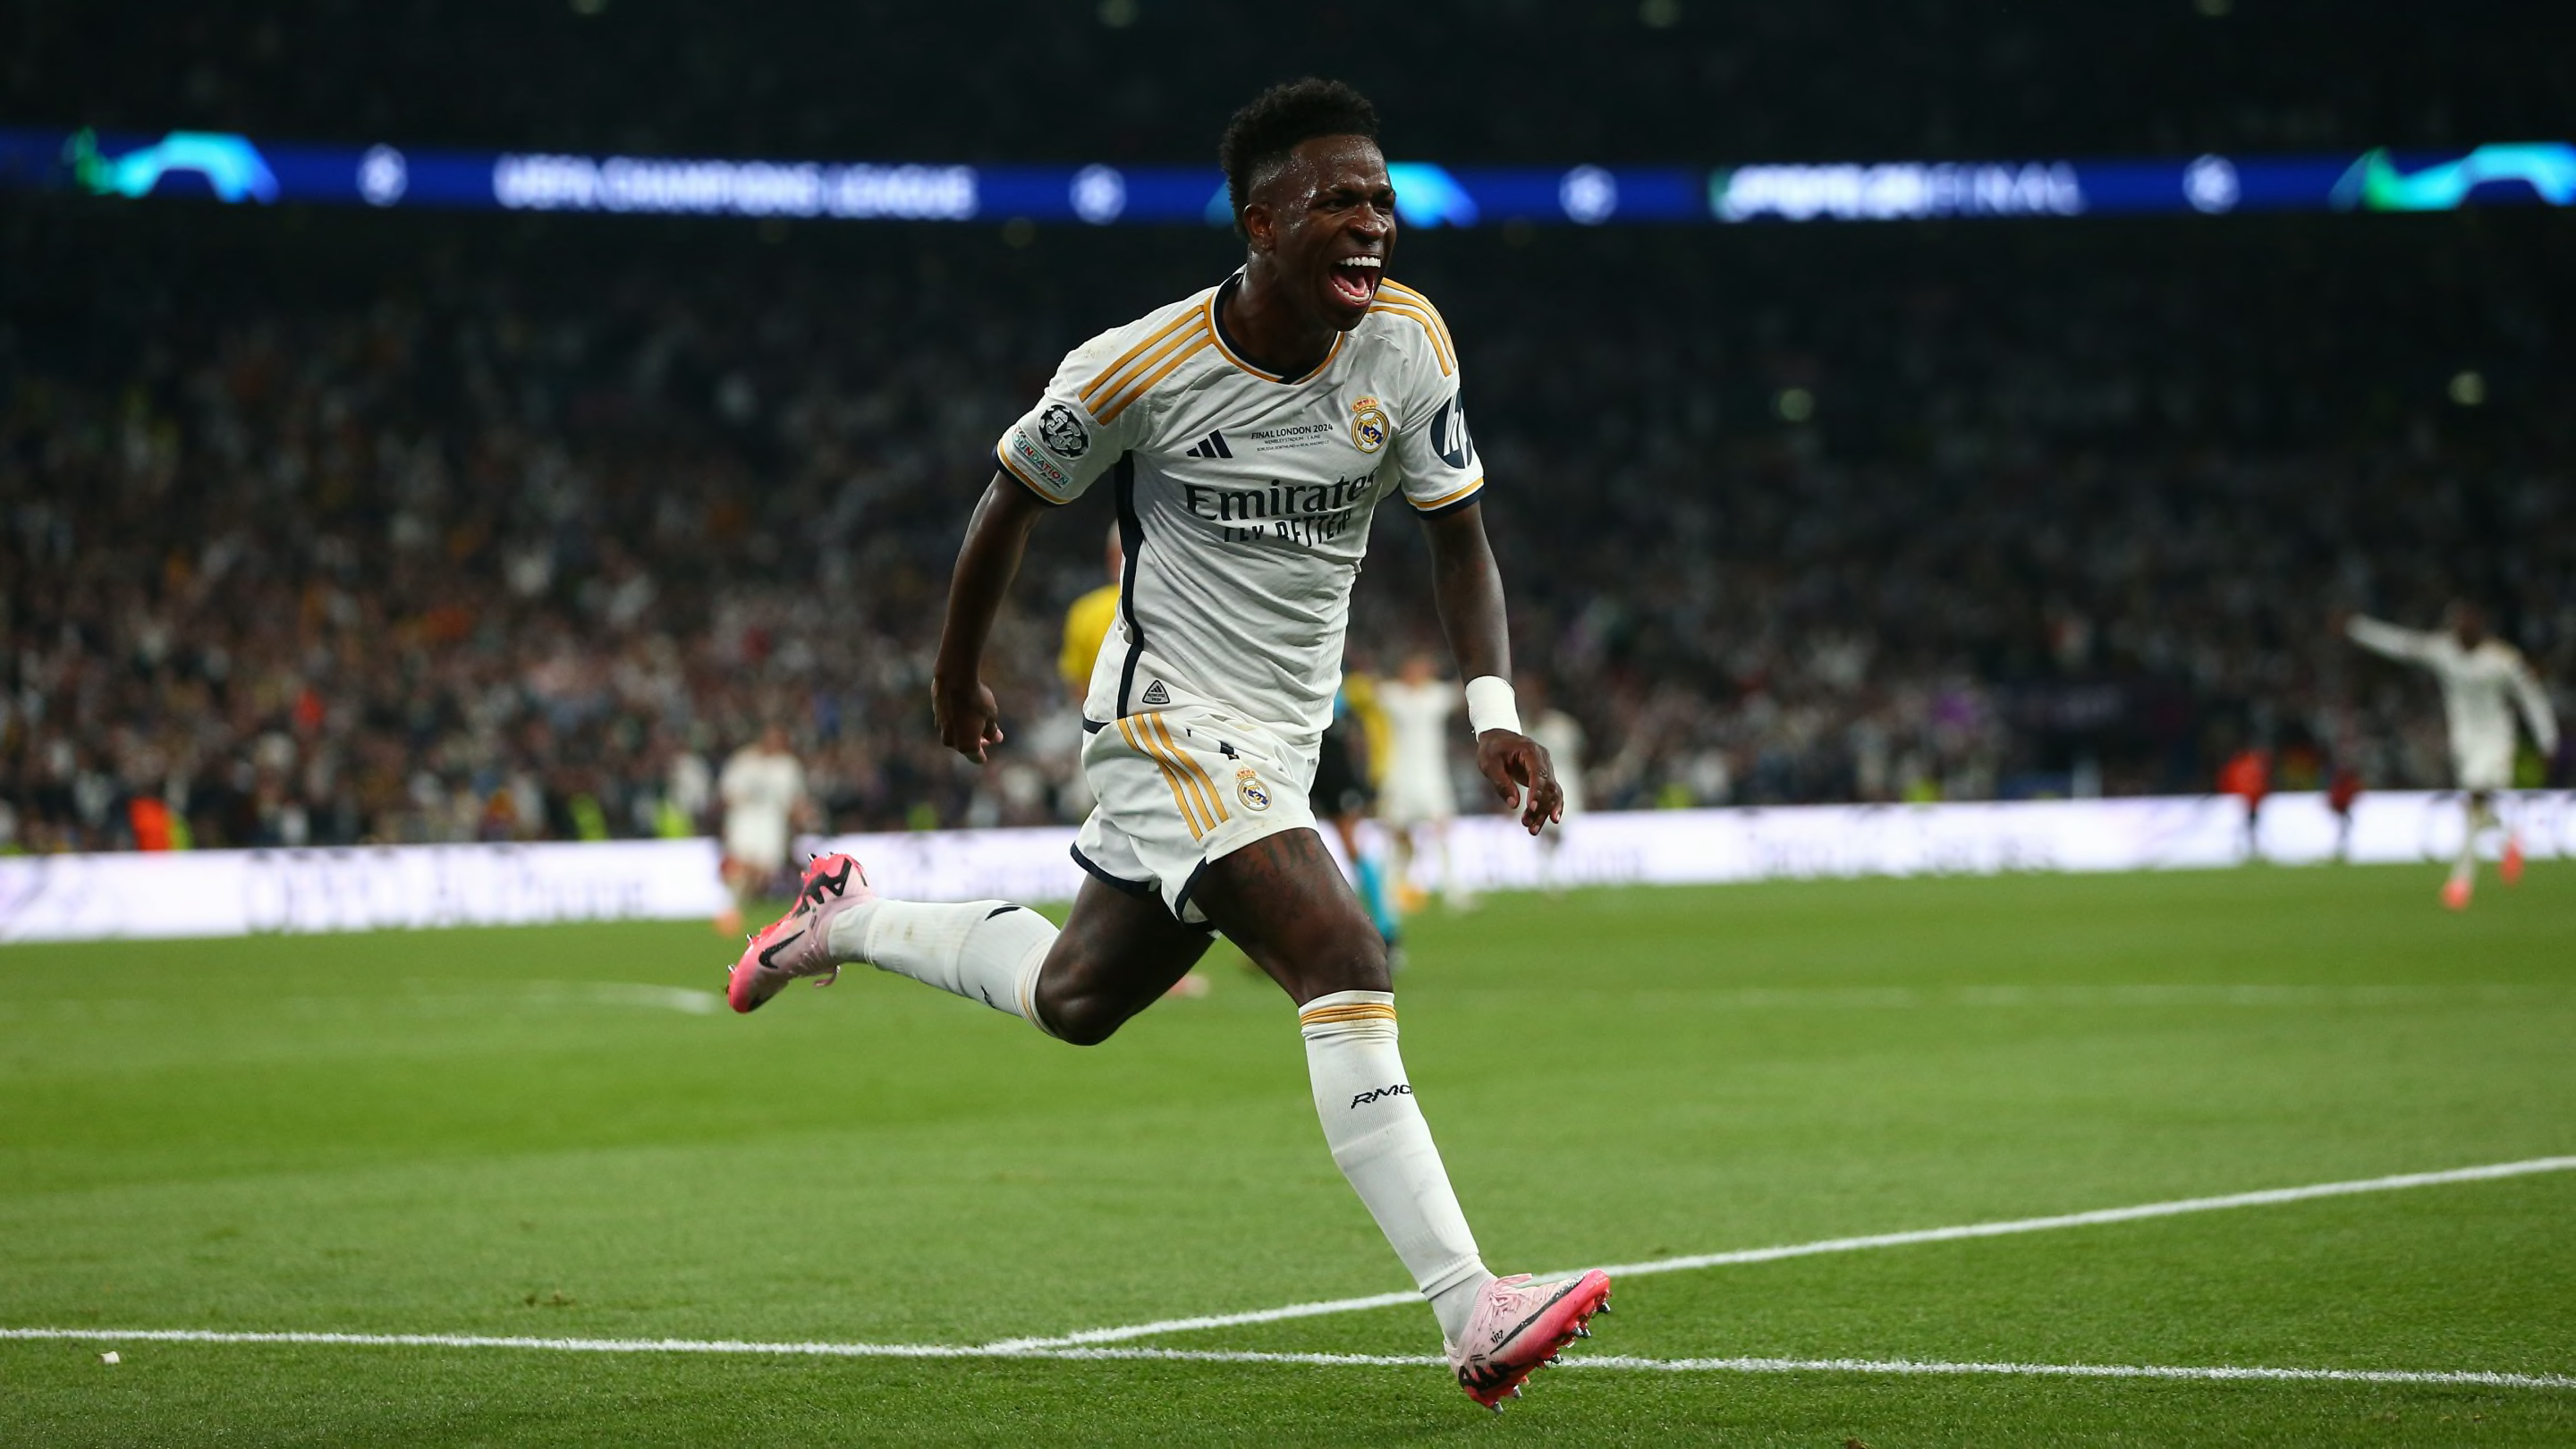 Brazil legend claims Vinicius Junior is best player in the world